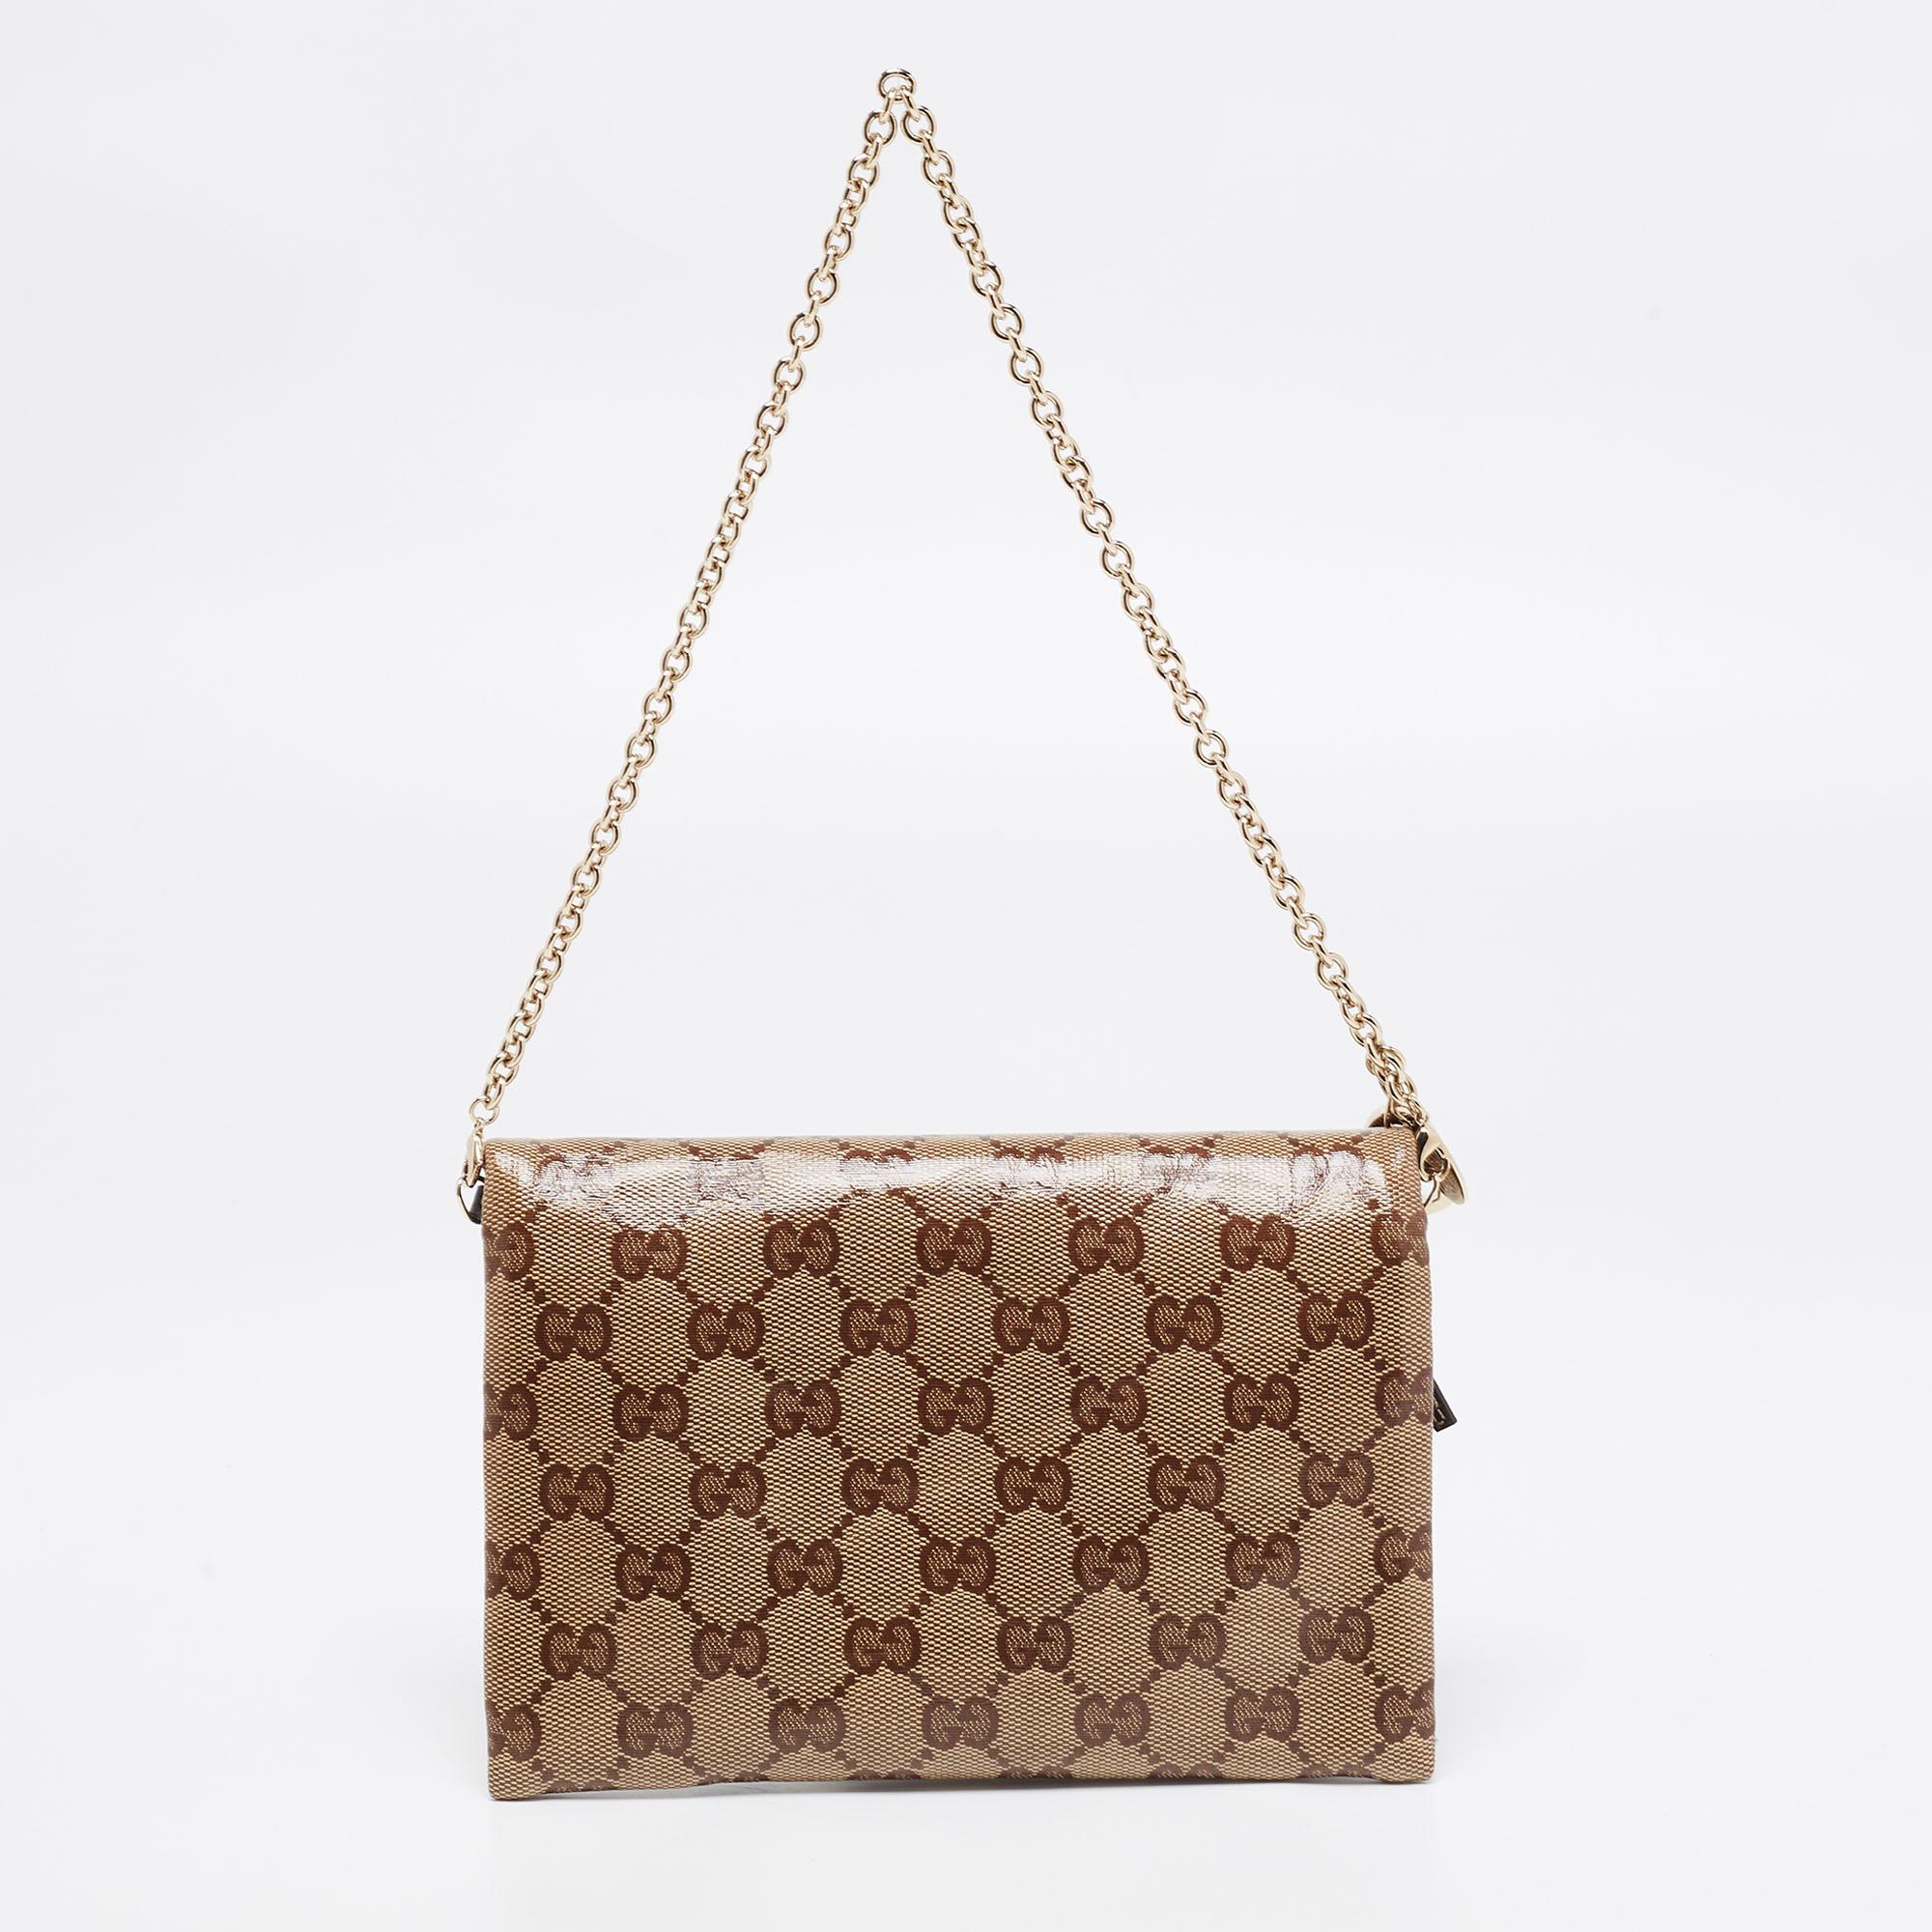 Gucci creations are popular owing to their high style and functionality. This wallet on chain is durable and stylish. Crafted from coated canvas, it can be paraded using the slender chain strap. It is complete with a front flap that reveals a